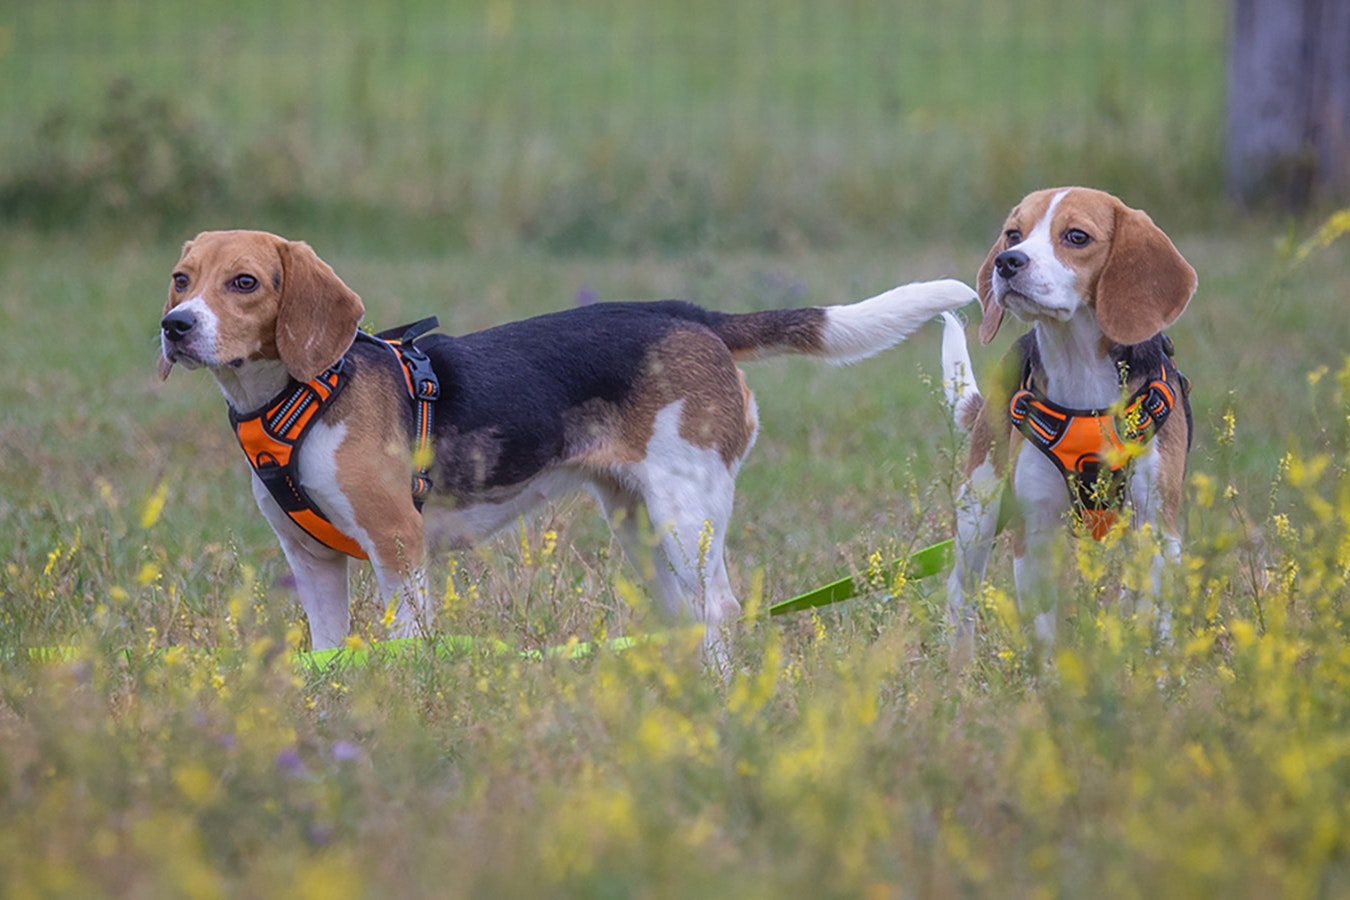 Kindness Ranch in Wyoming rescued 150 beagles from being lab testing animals earlier this year and continues to bring in animals for rehabilitation and adoption.